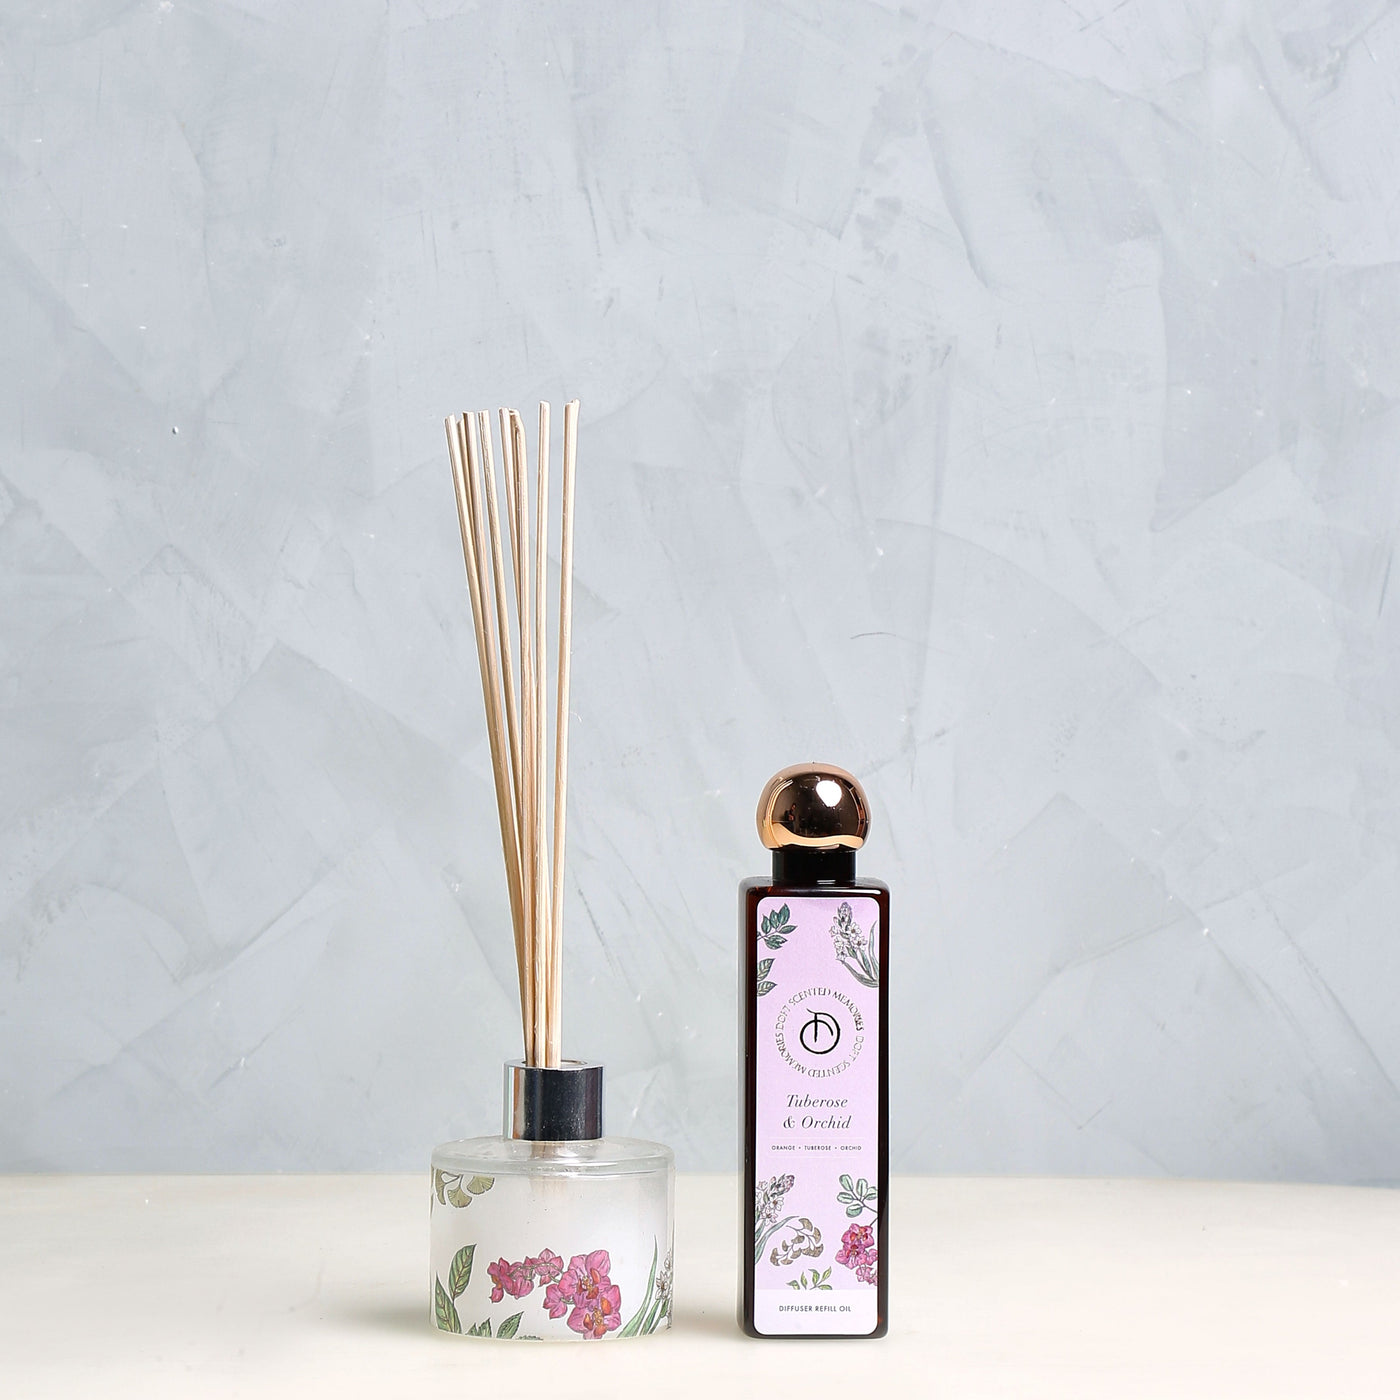 Tuberose and Orchid Reed Diffuser from Doft Candles